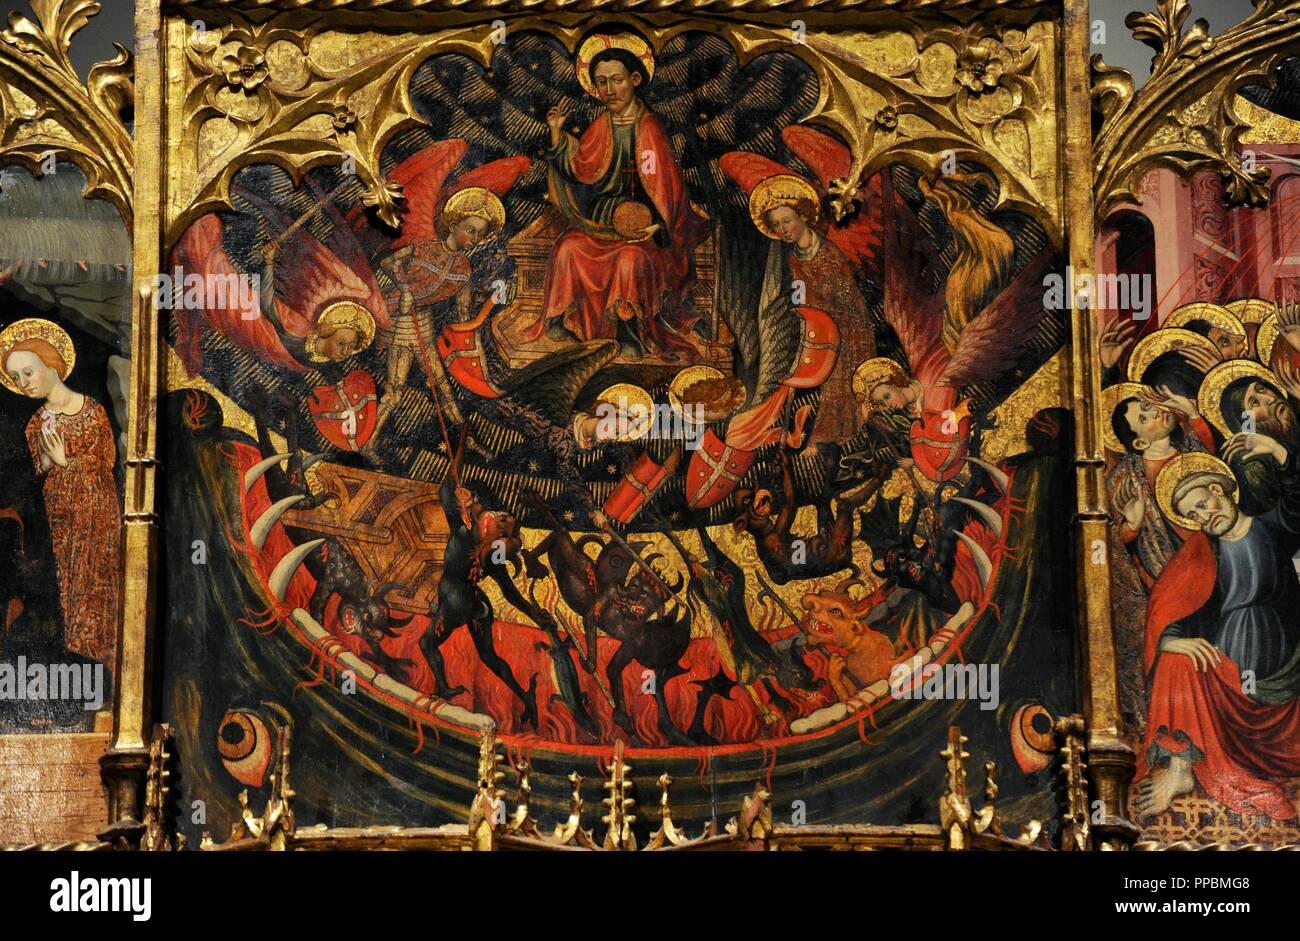 Bernat Despuig (documented between 1383-1451) and Jaume Cirera (active 1418-1449/1450) . Altarpiece of Saint Michael and Saint Peter, 1432-1433. Detail depicting the final Battle between angels and demons according to the Book of Revelation. Gothic. From the hight altar of the Church of Sant Miquel de la Seu Urgell, Catalonia. National Art Museum of Catalonia. Barcelona. Catalonia. Spain. Stock Photo